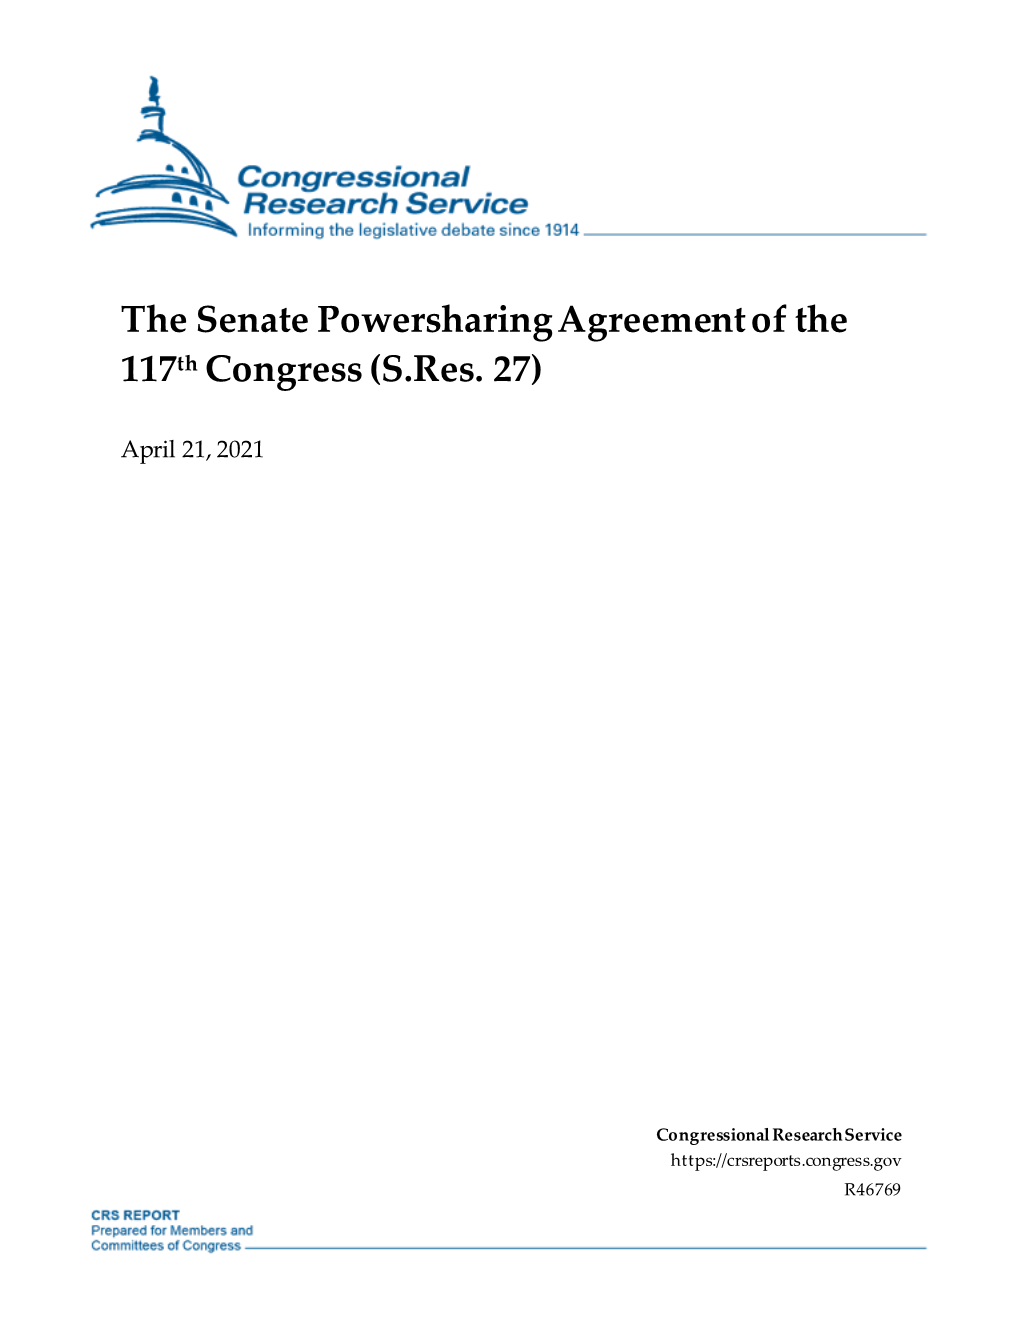 The Senate Powersharing Agreement of the 117Th Congress (S.Res. 27)